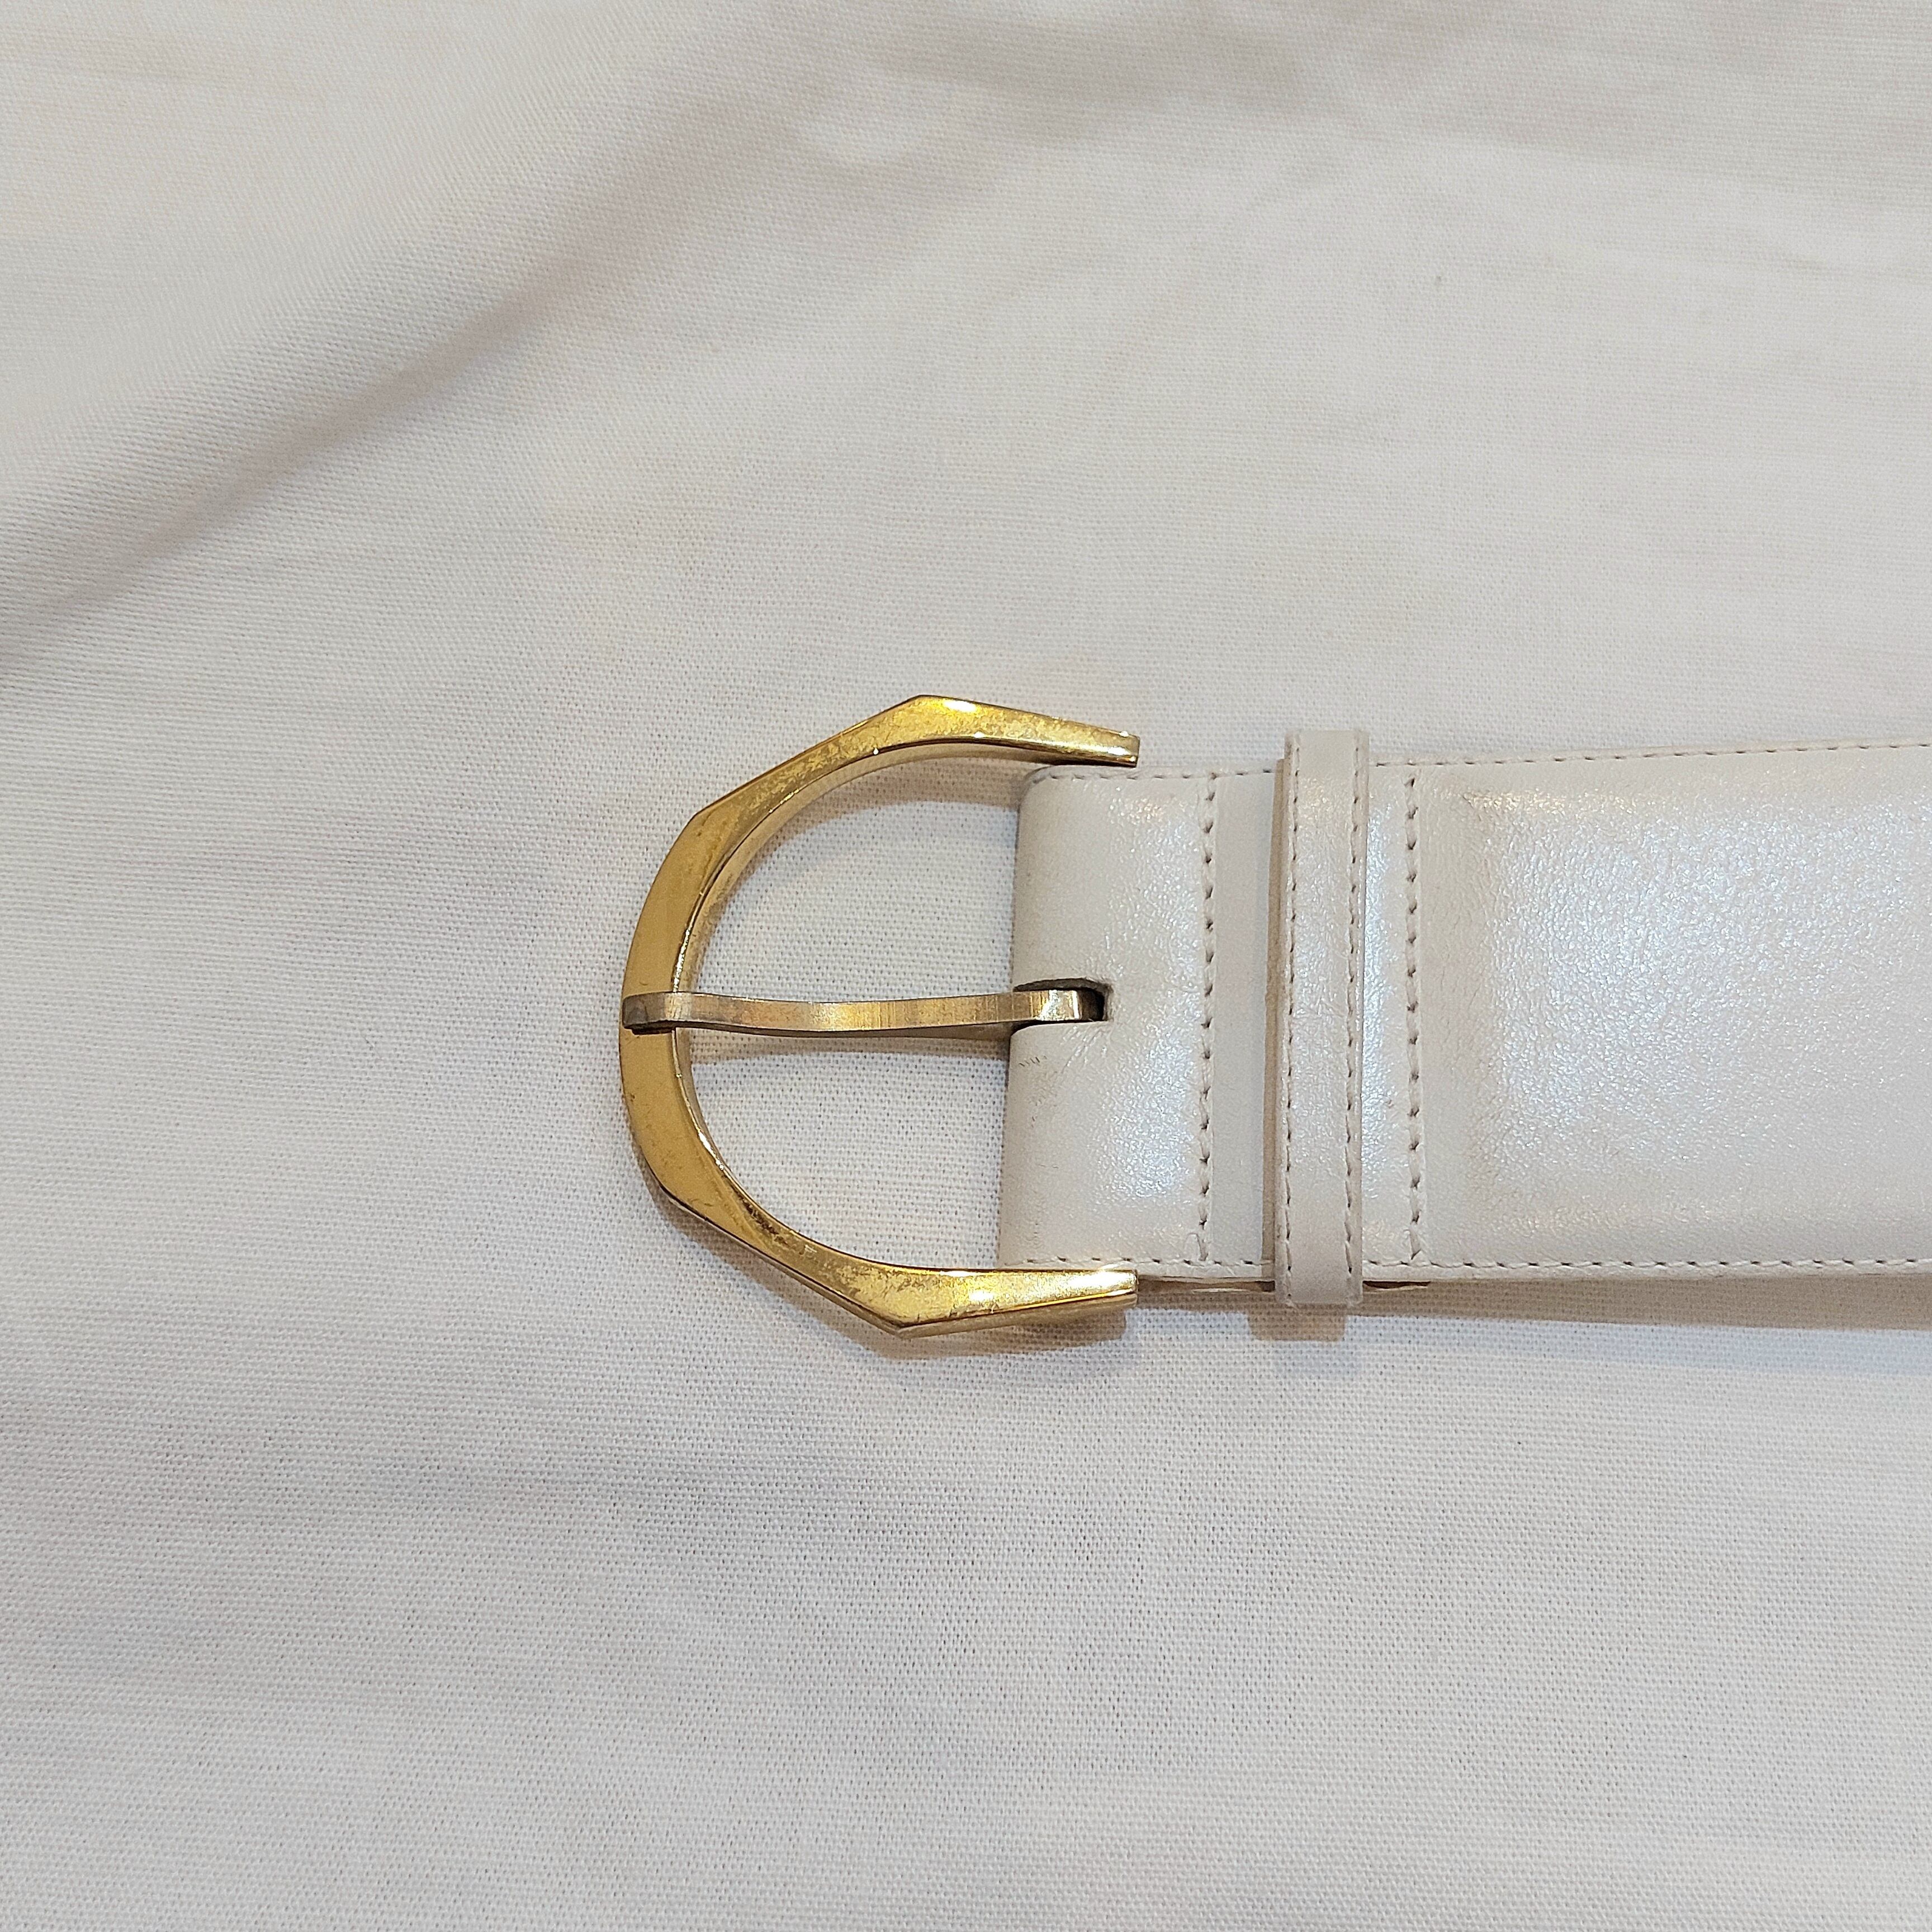 CHARLES JOURDAN Two-tone leather belt / Made in France[c-350] | PREIN